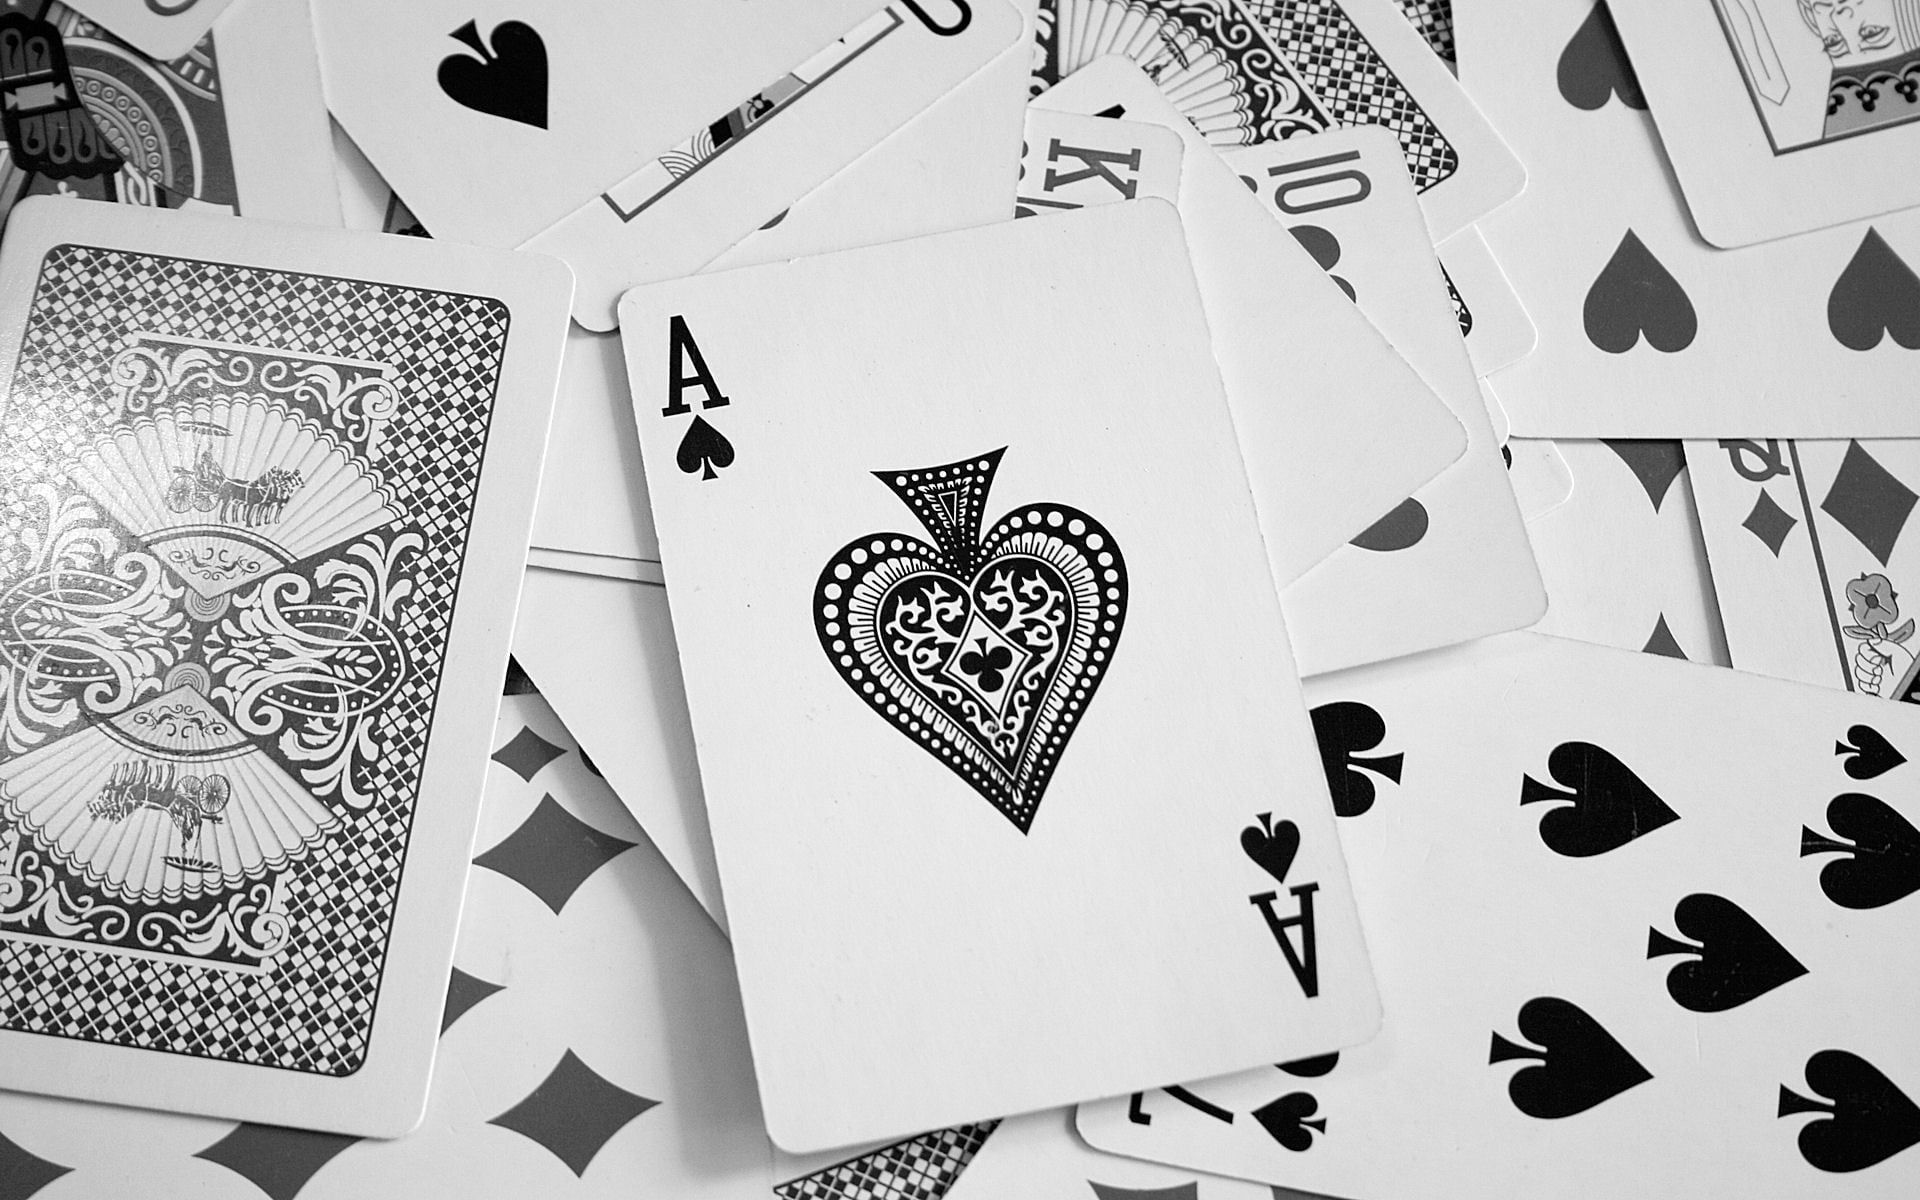 Playing card lot cards ace of spades monochrome playing cards p wallpaper hdwallpaper desktop ààààà ààààà àààààààà